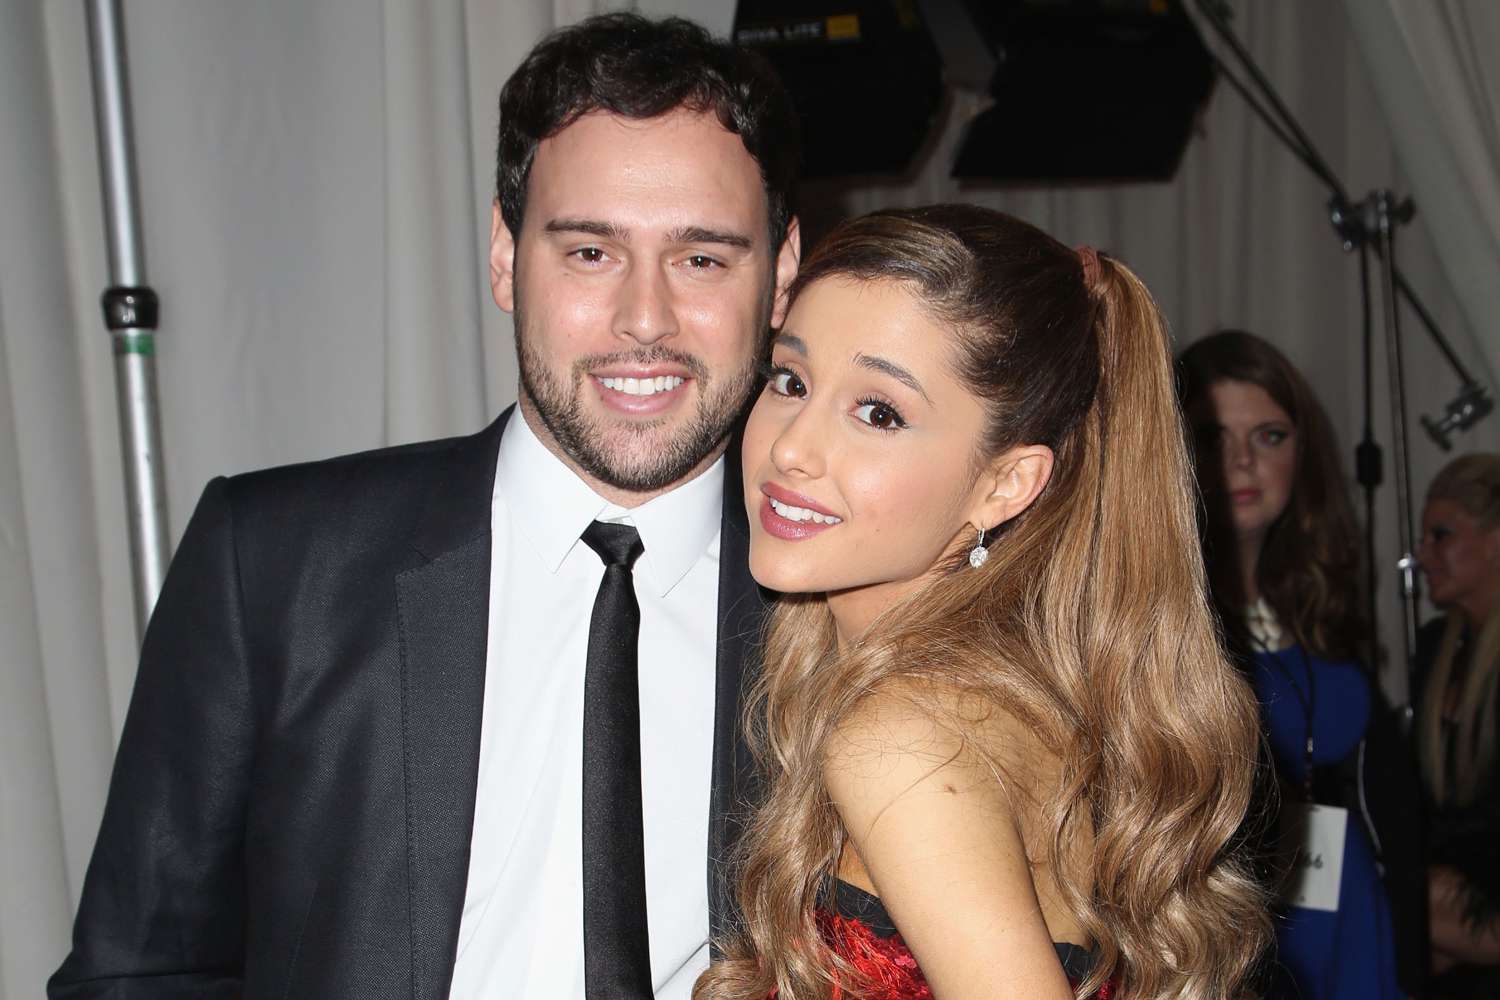 Scooter Braun and recording artist Ariana Grande attend the 2013 American Music Awards at Nokia Theatre